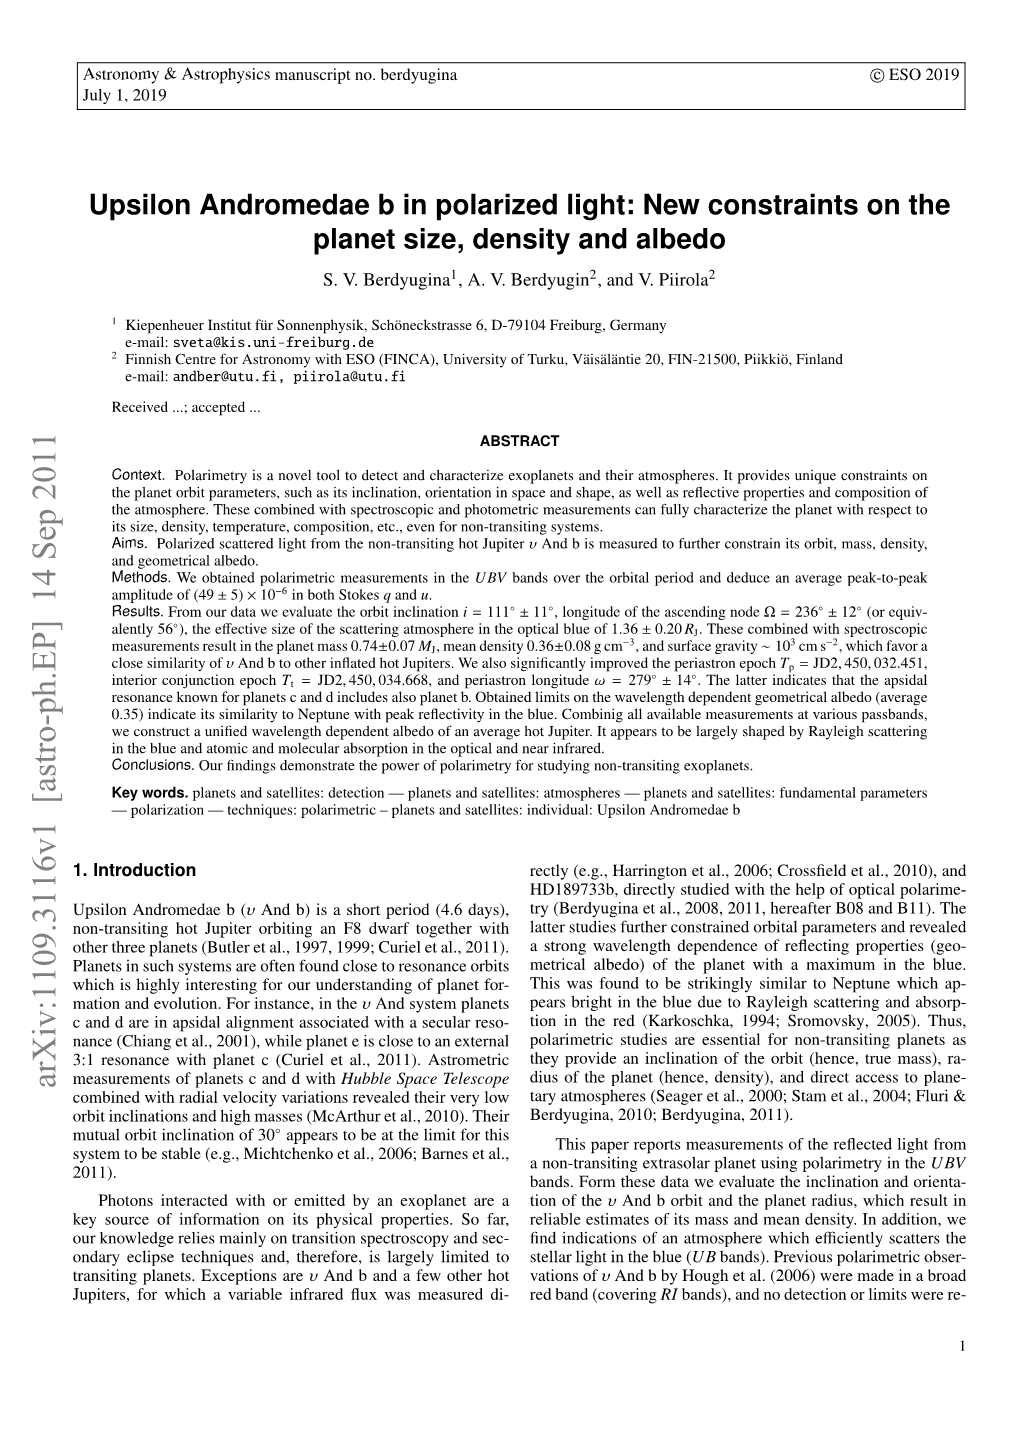 Upsilon Andromedae B in Polarized Light: New Constraints on the Planet Size, Density and Albedo S